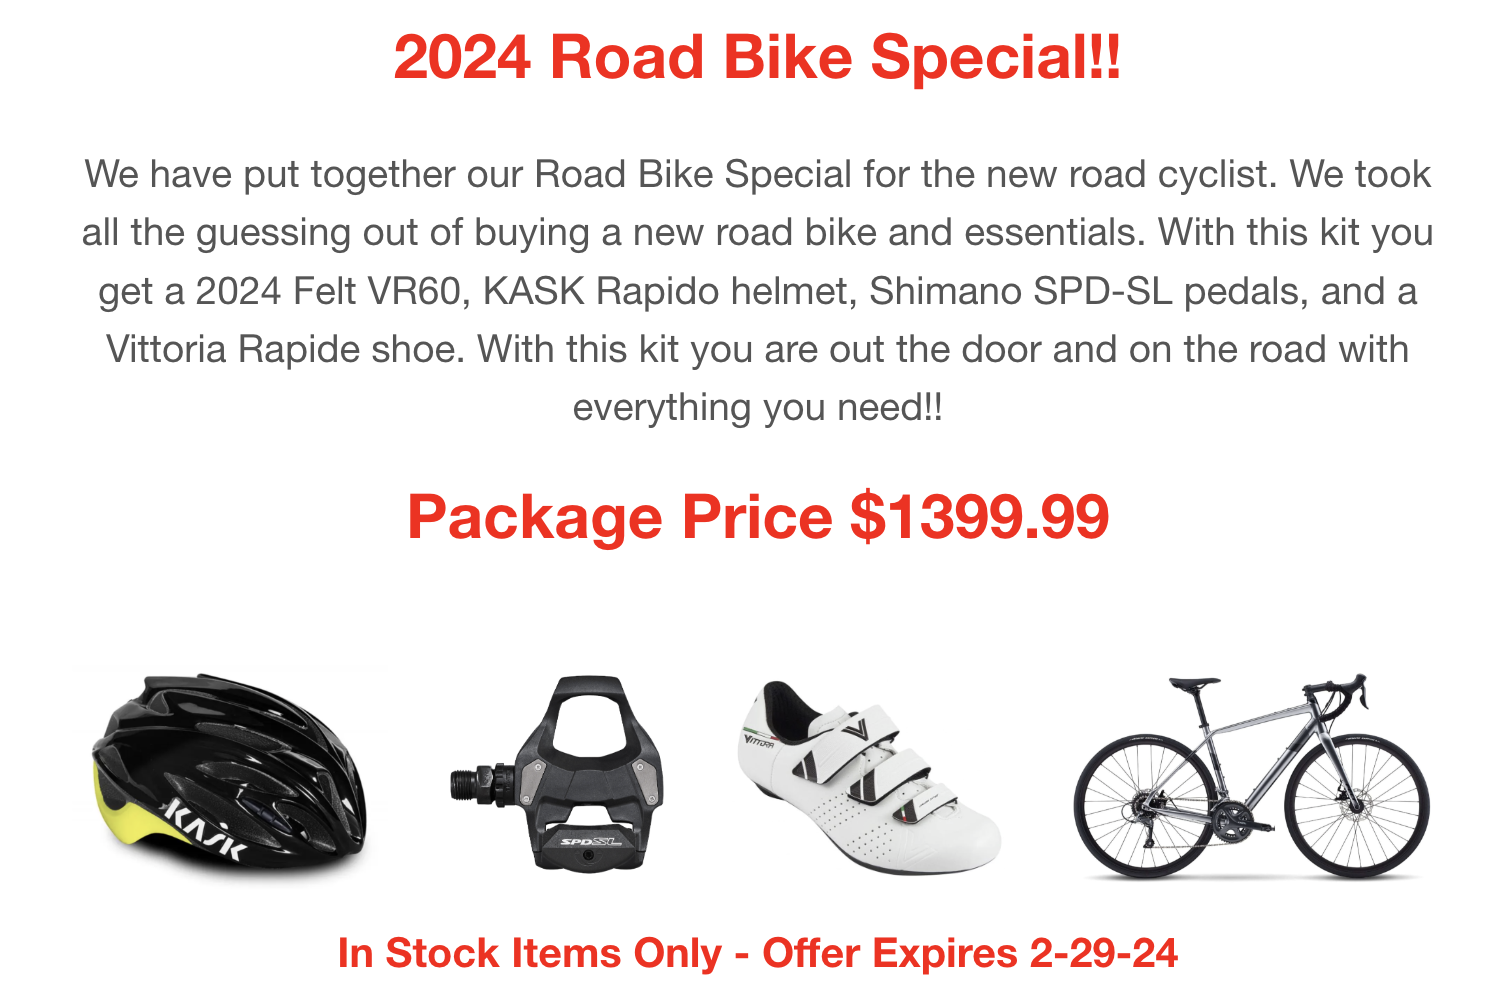 Flyer promoting a special on road bikes in San Diego featuring Colnago and Orbea models.